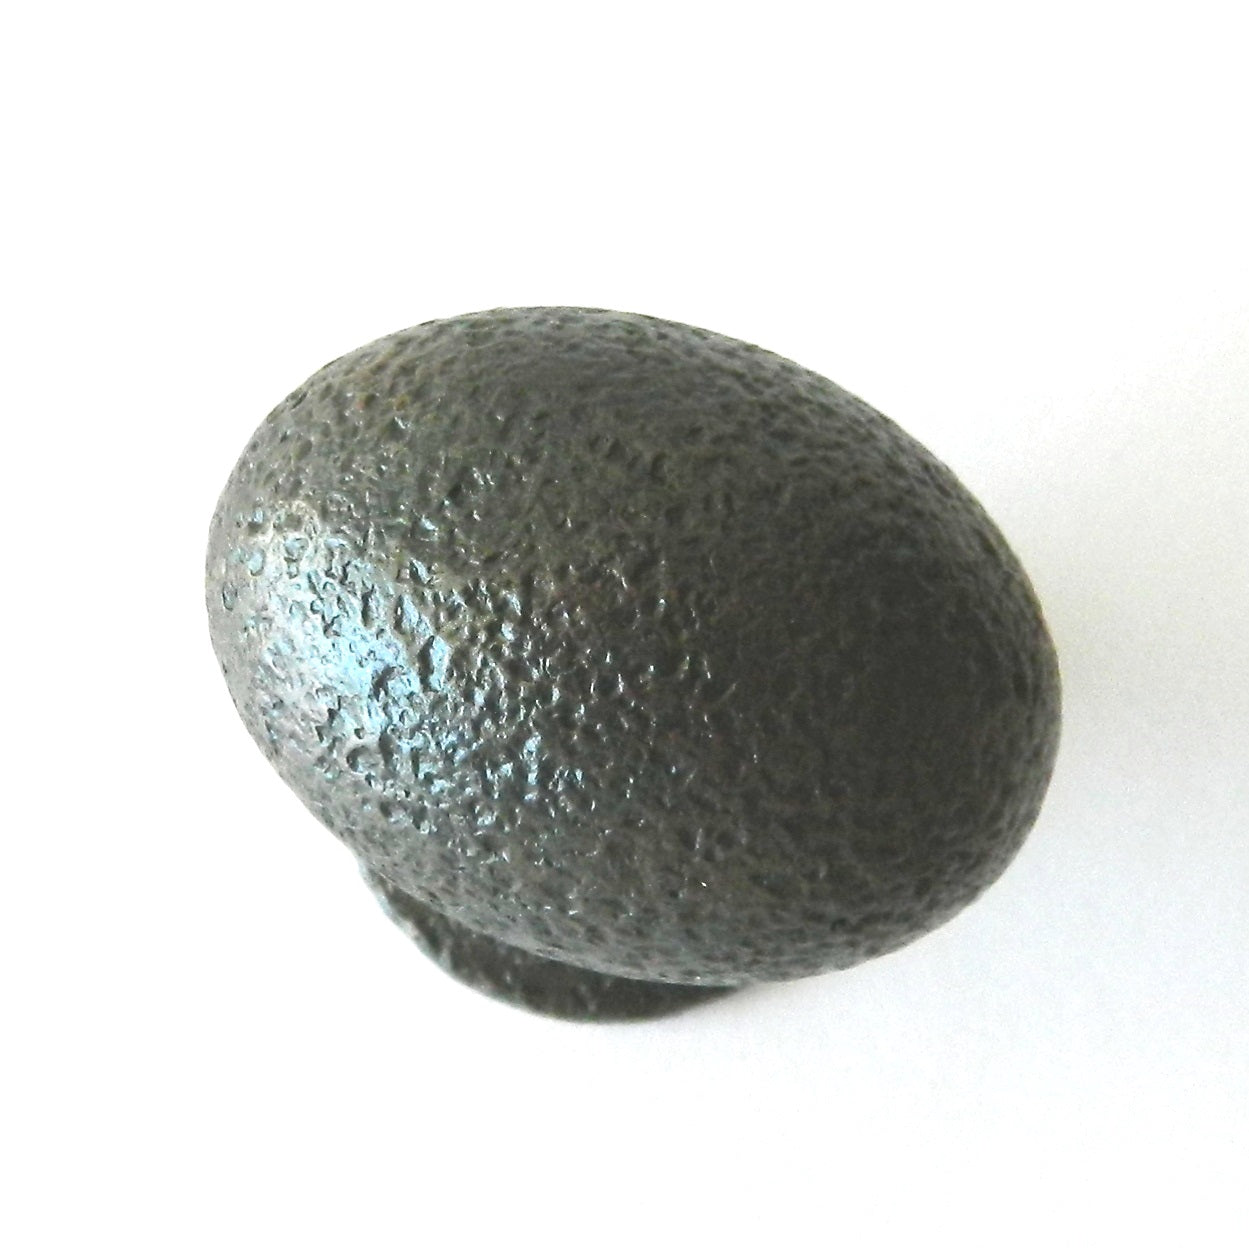 Ancient Treasures Rustic Hammered Oil Rubbed Bronze 1 3/8" Pull Knob C003ORB